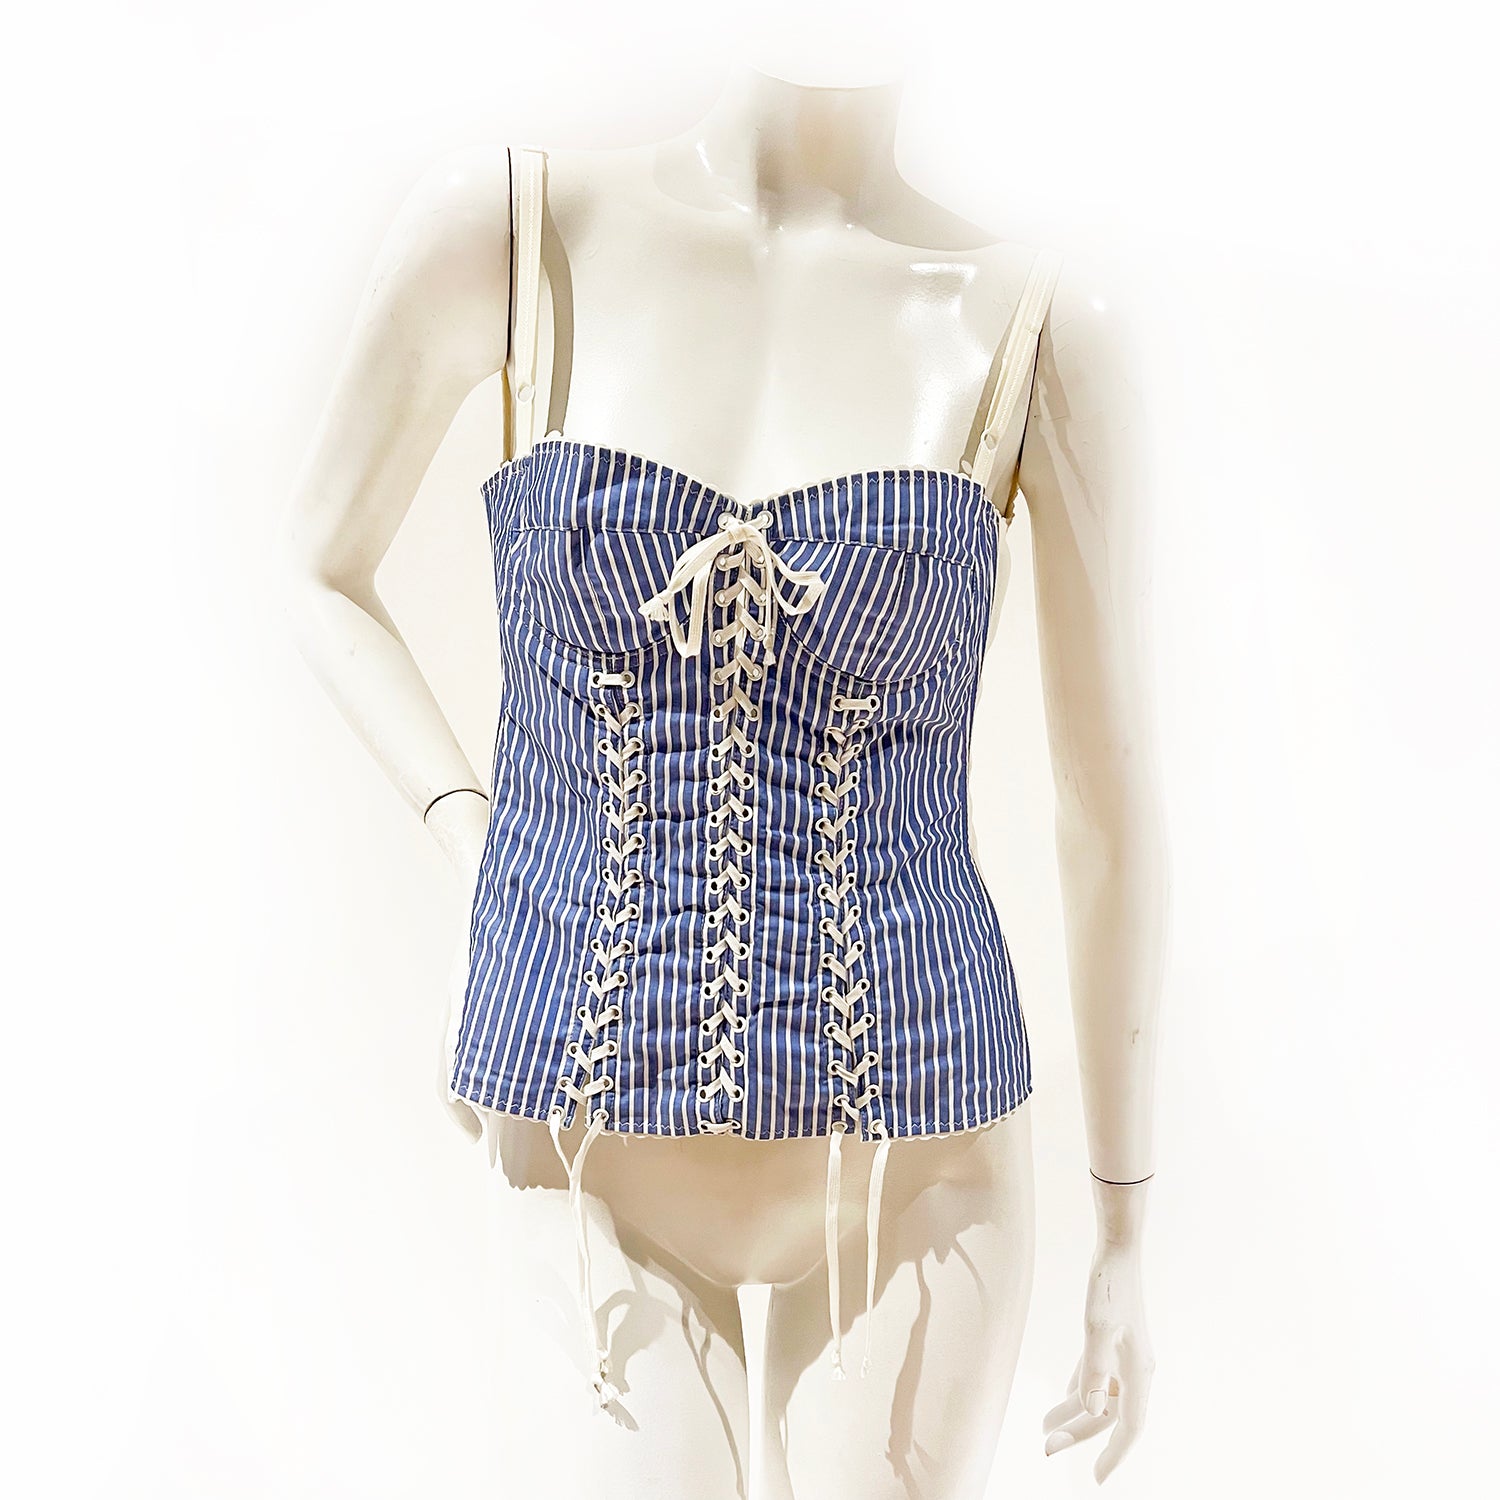 Dolce & Gabbana Blue and White Stripe Lace Up Corset Top